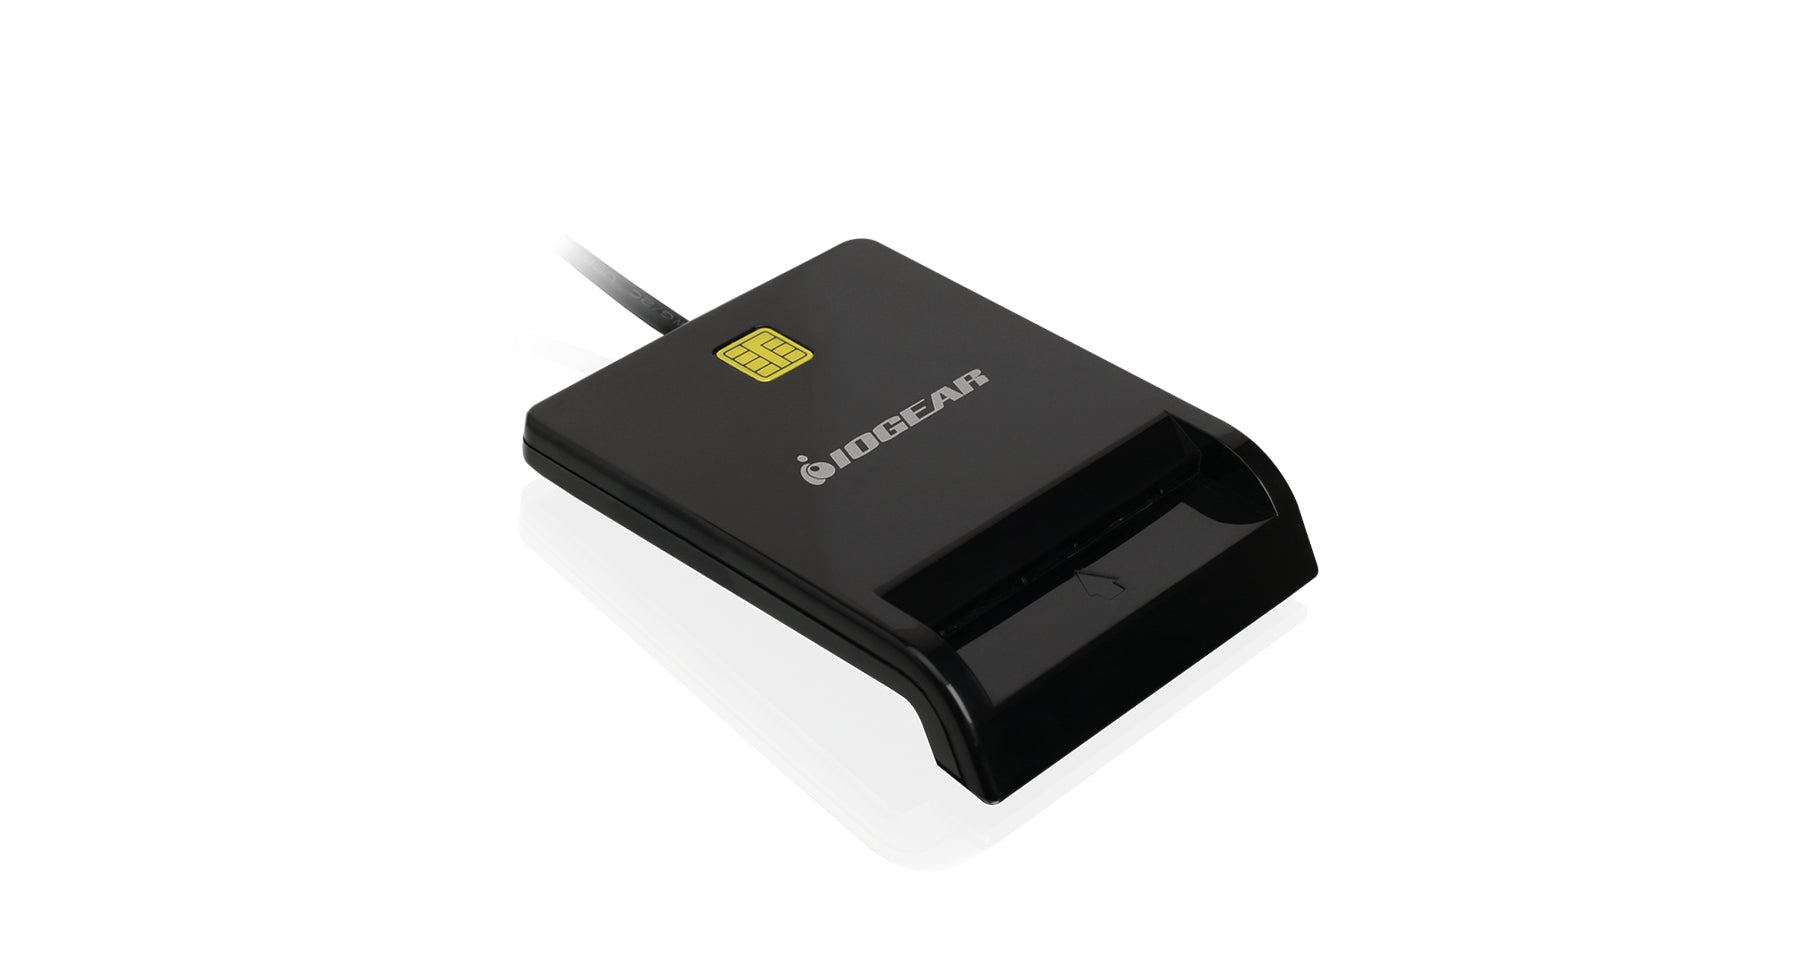 USB Common Access Card (CAC) Reader